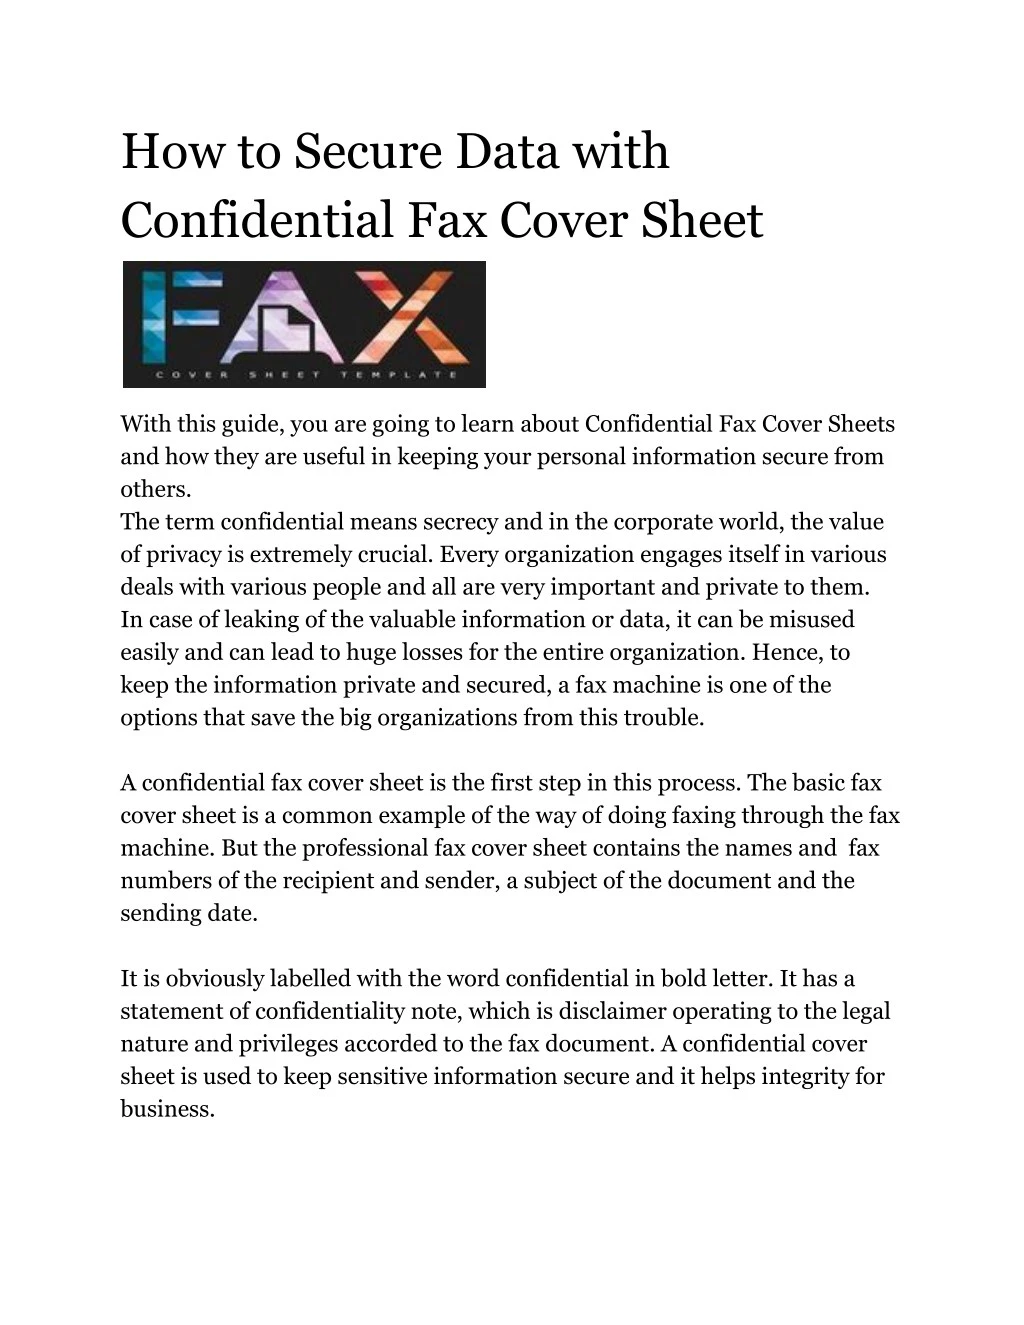 how to secure data with confidential fax cover